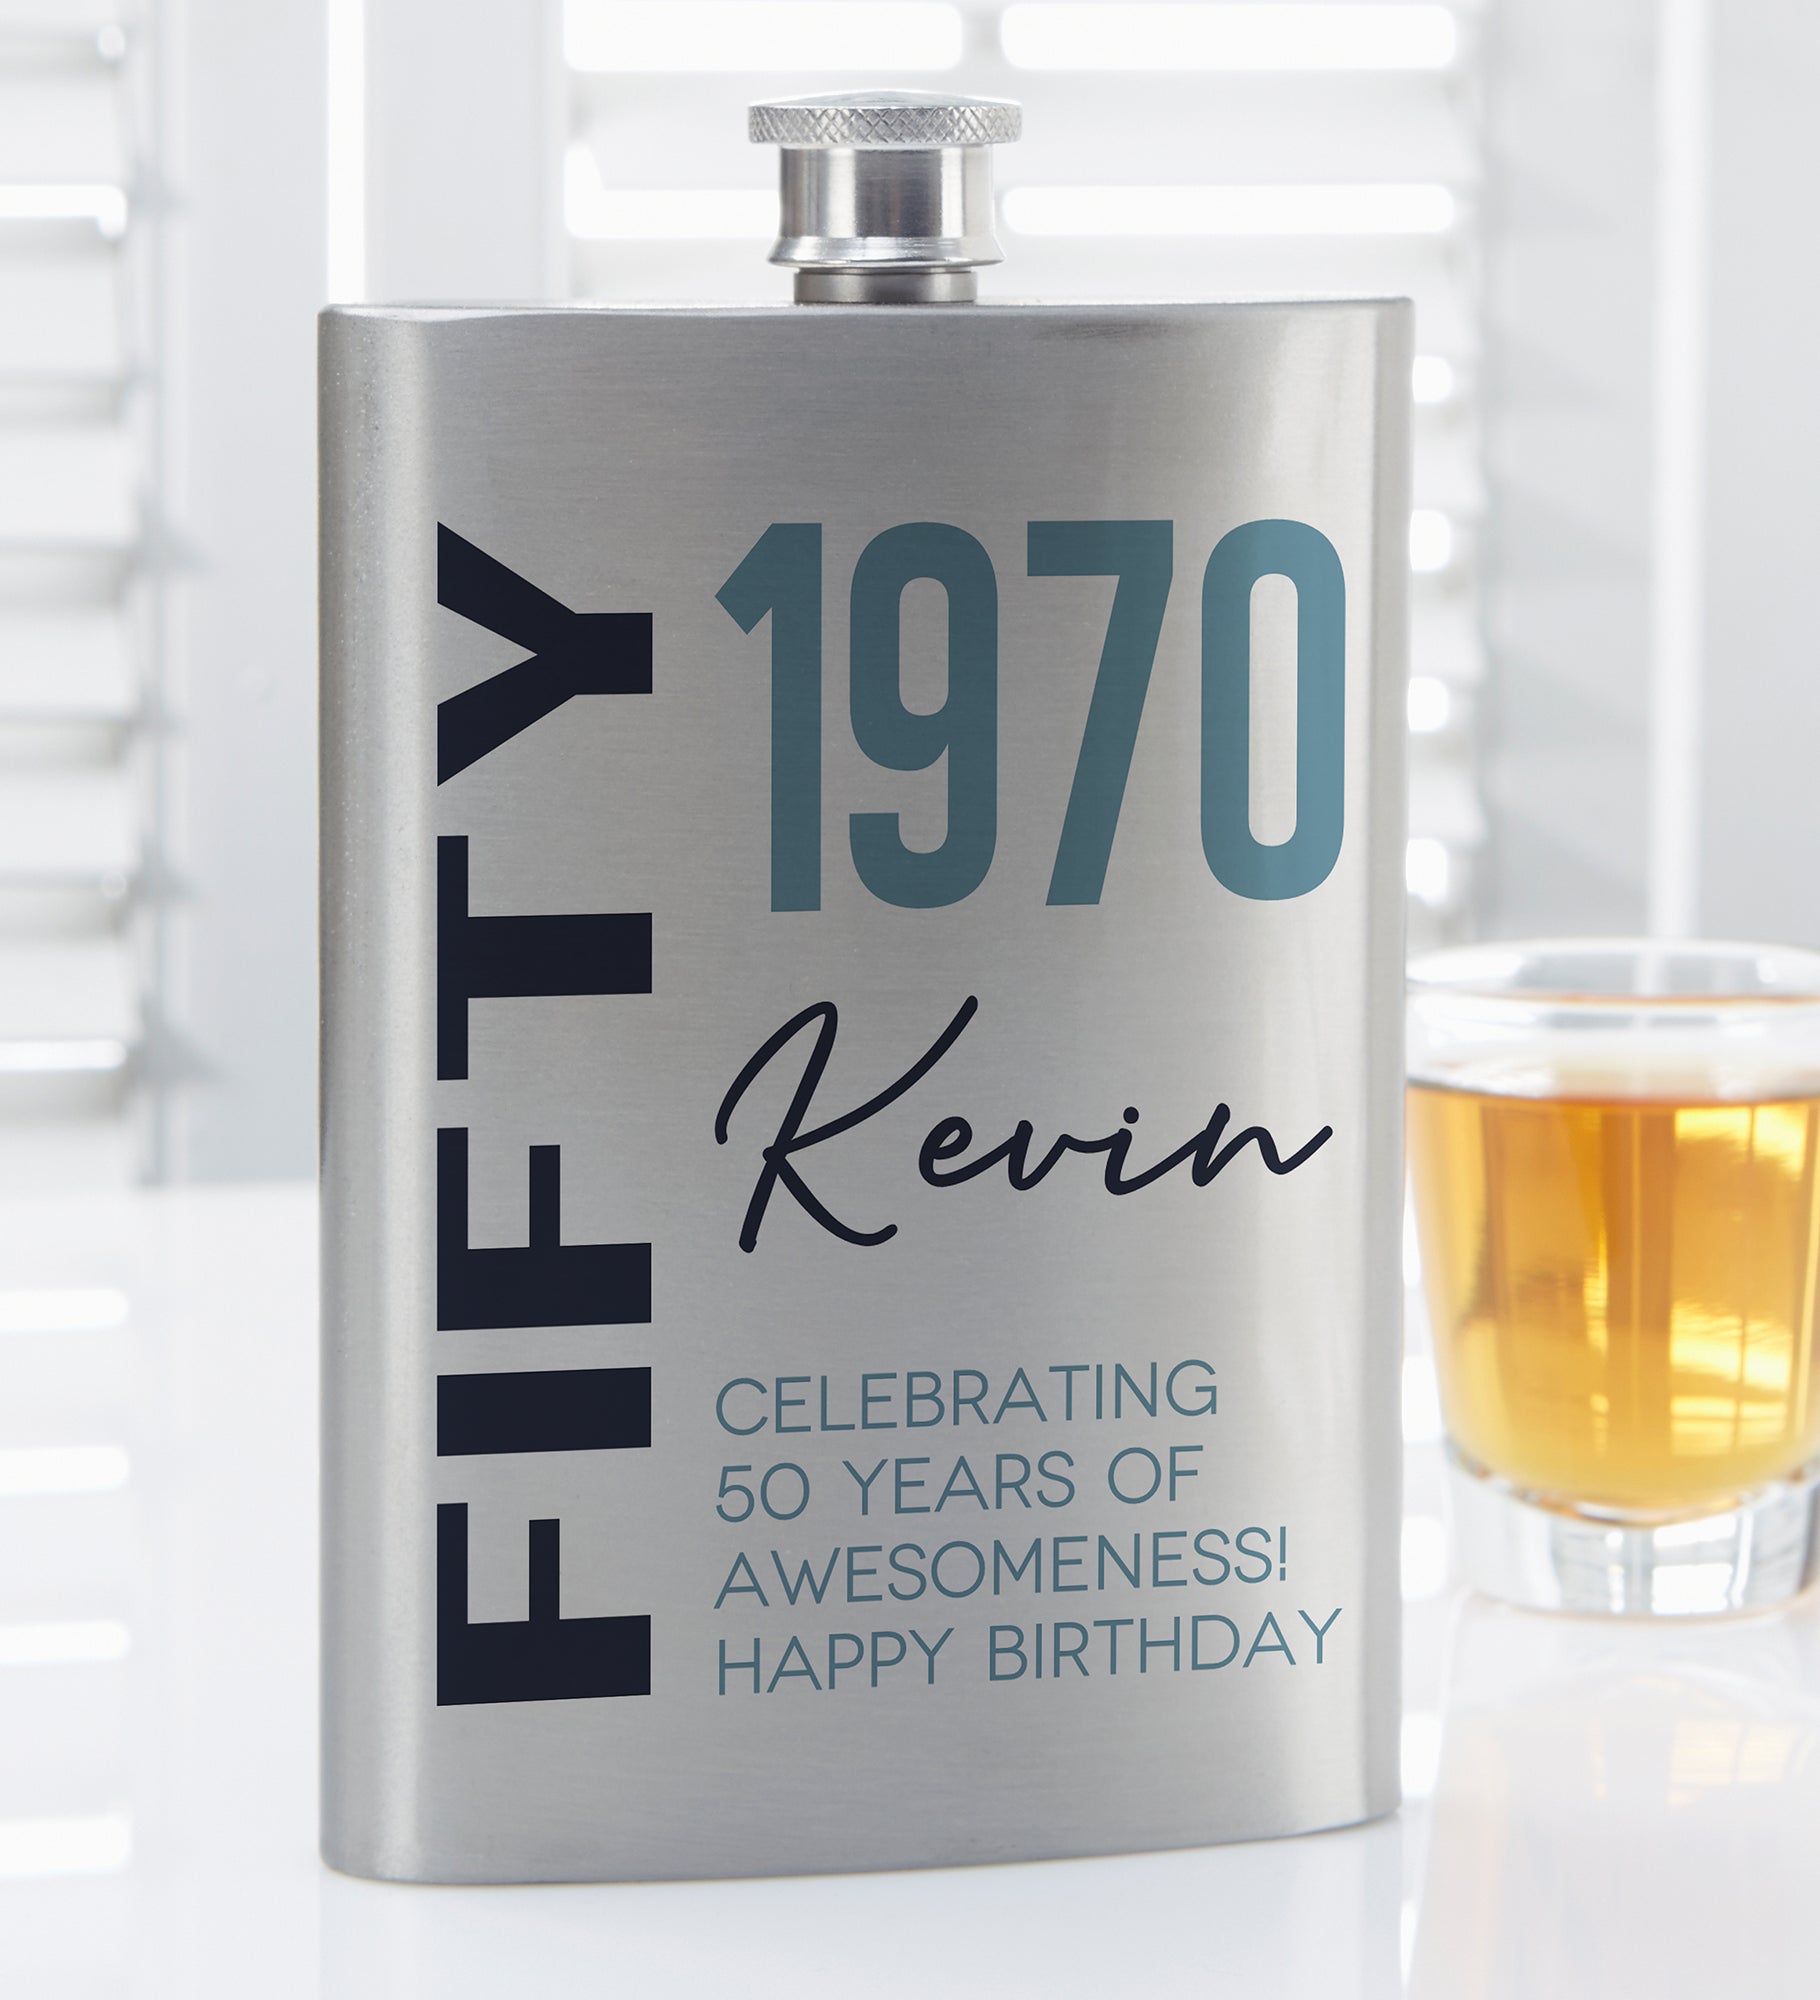 Timeless Birthday Personalized Flask